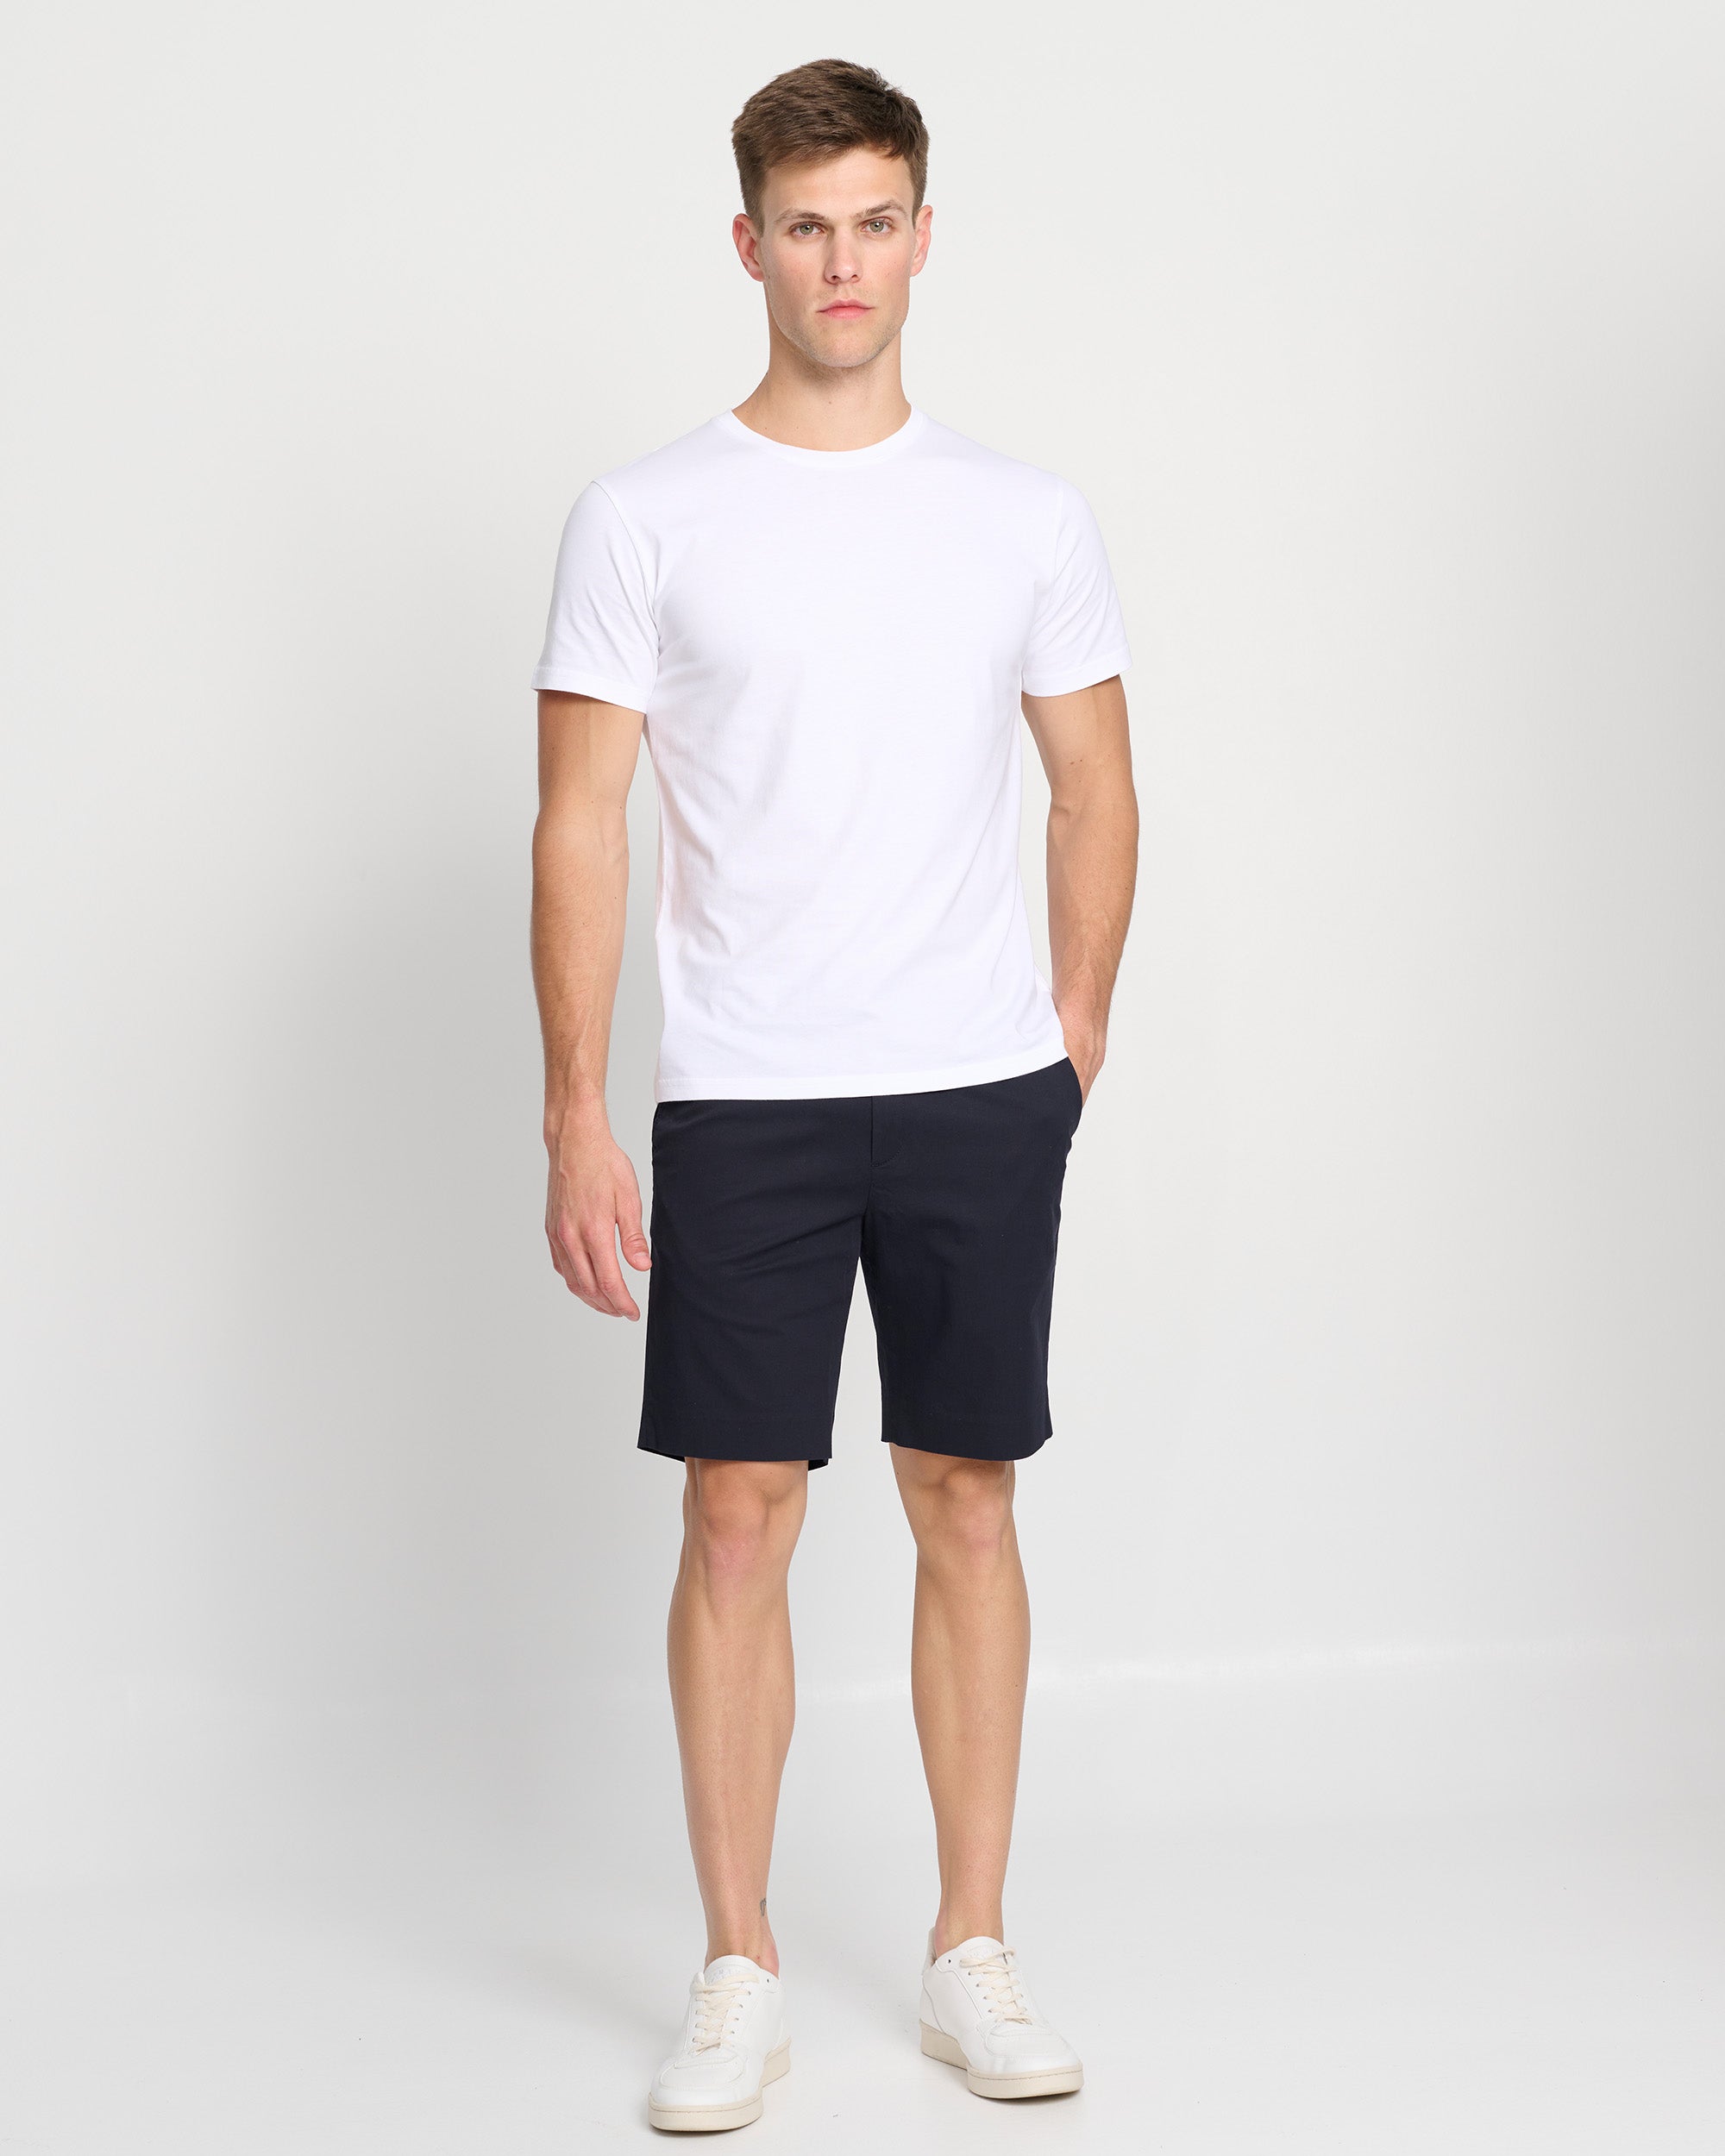 The Navy Smart Shorts for Men | Slim Fit, Stretch Cotton